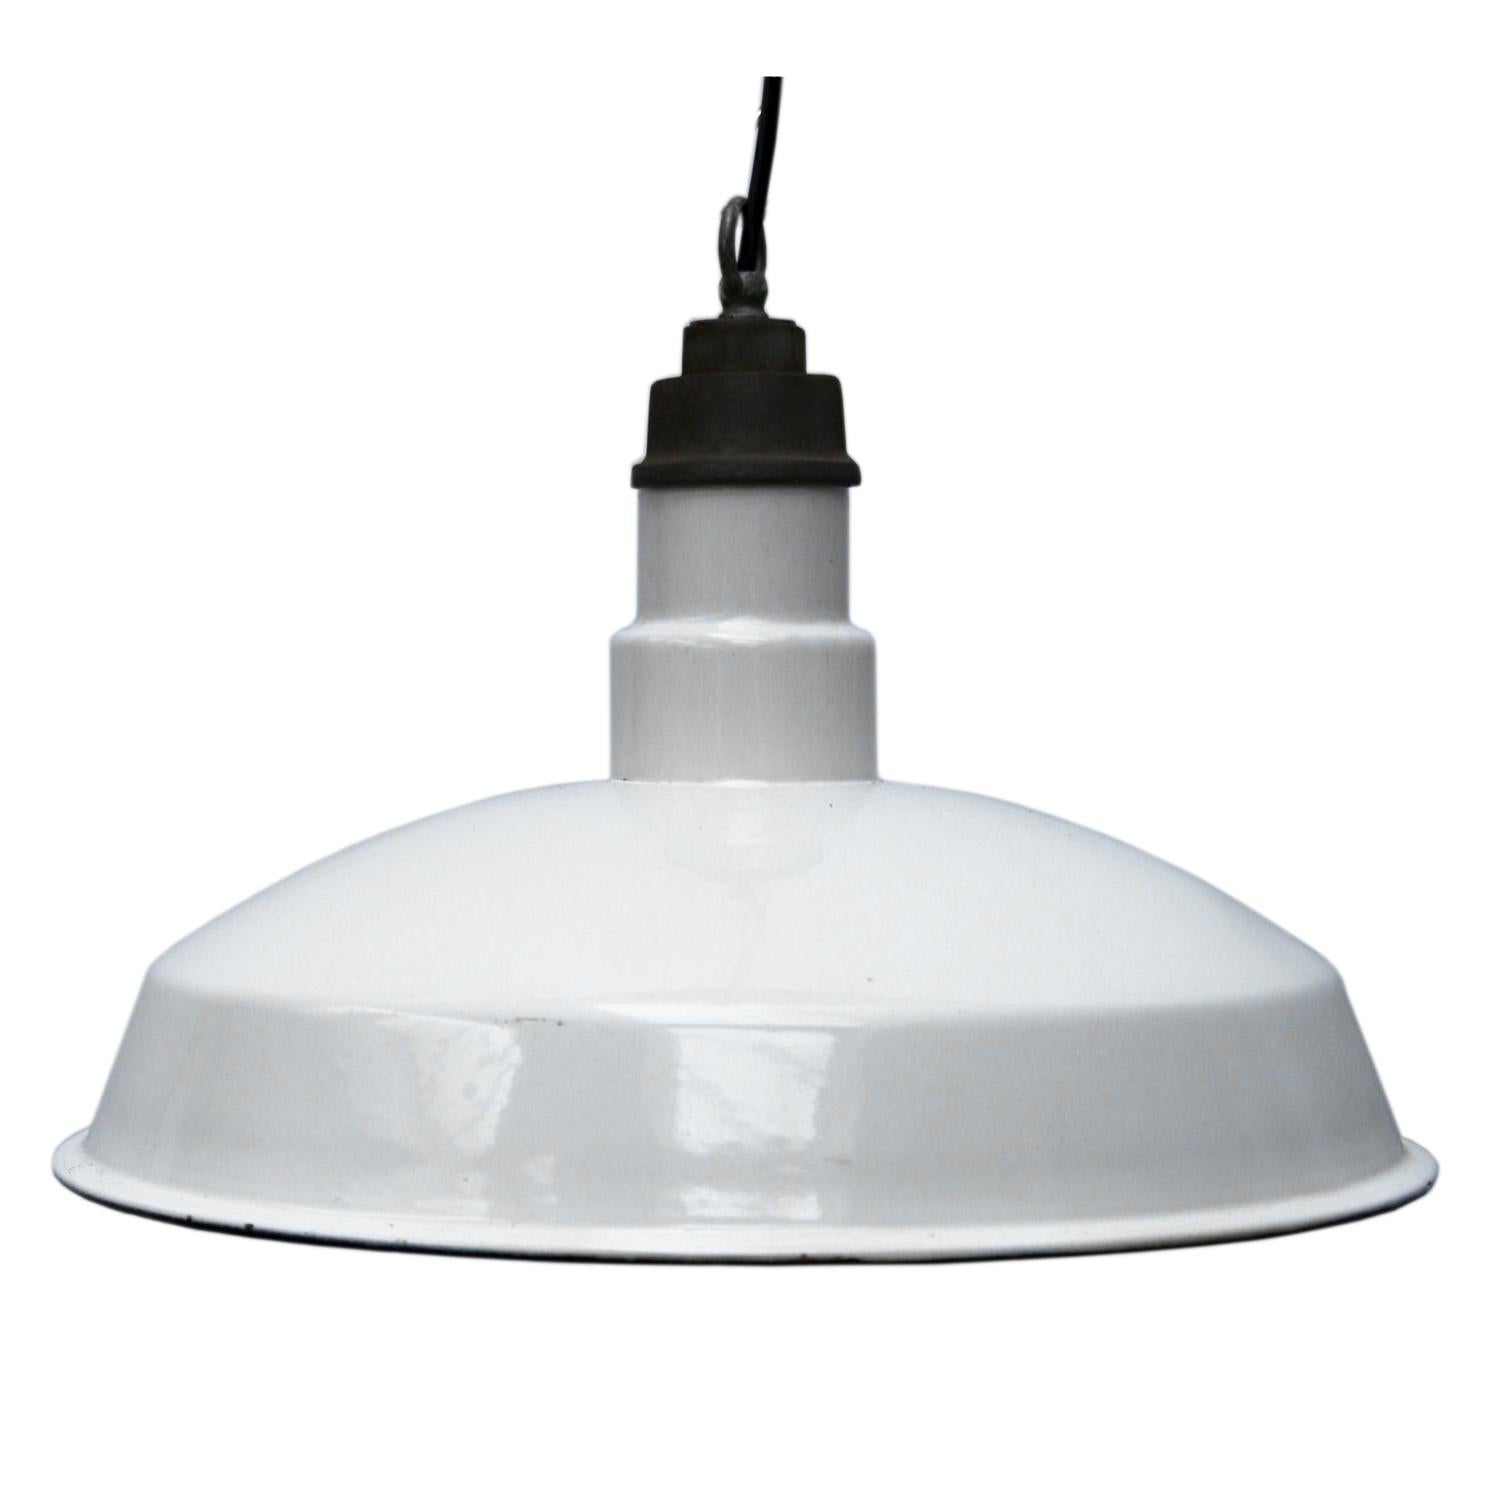 Factory hanging light. White enamel. White interior.
Cast aluminium top. Made in the USA . 2 meter wire.  

Measure: Weight: 1.1 kg / 2.4 lb

Priced individual item. All lamps have been made suitable by international standards for incandescent